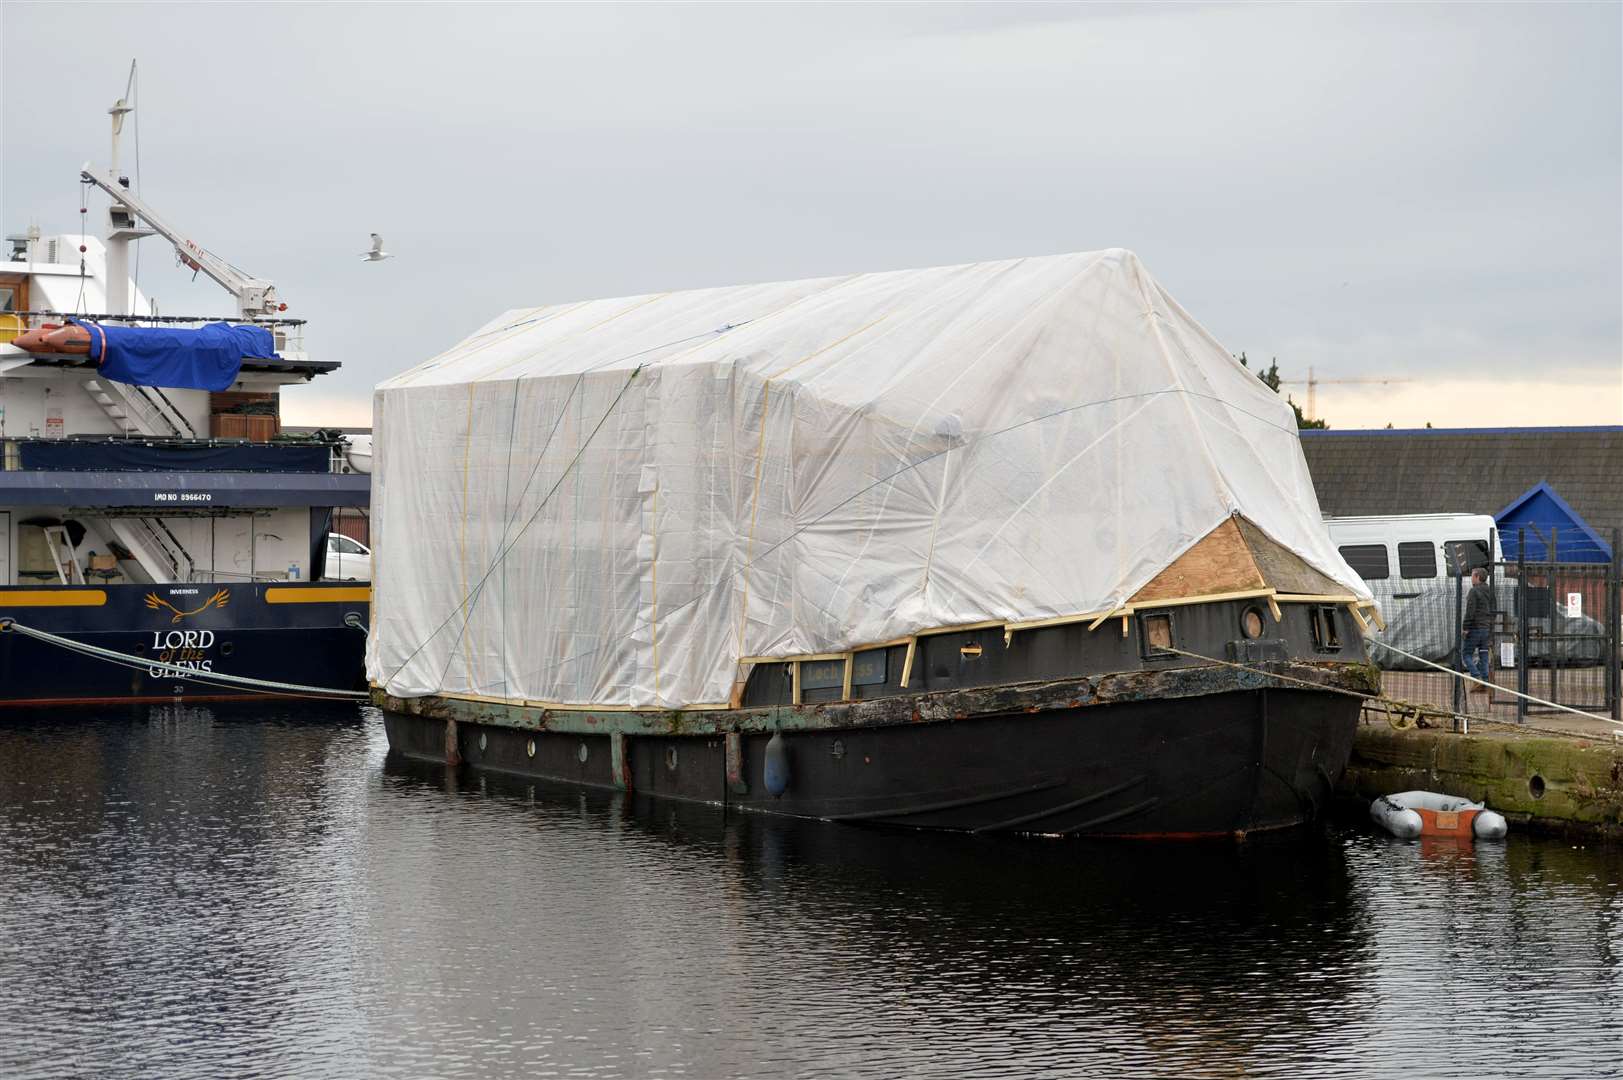 The boat at Muirtown Basin, behind B&M, is becoming more like a house because a wooden extension is being built onto it.